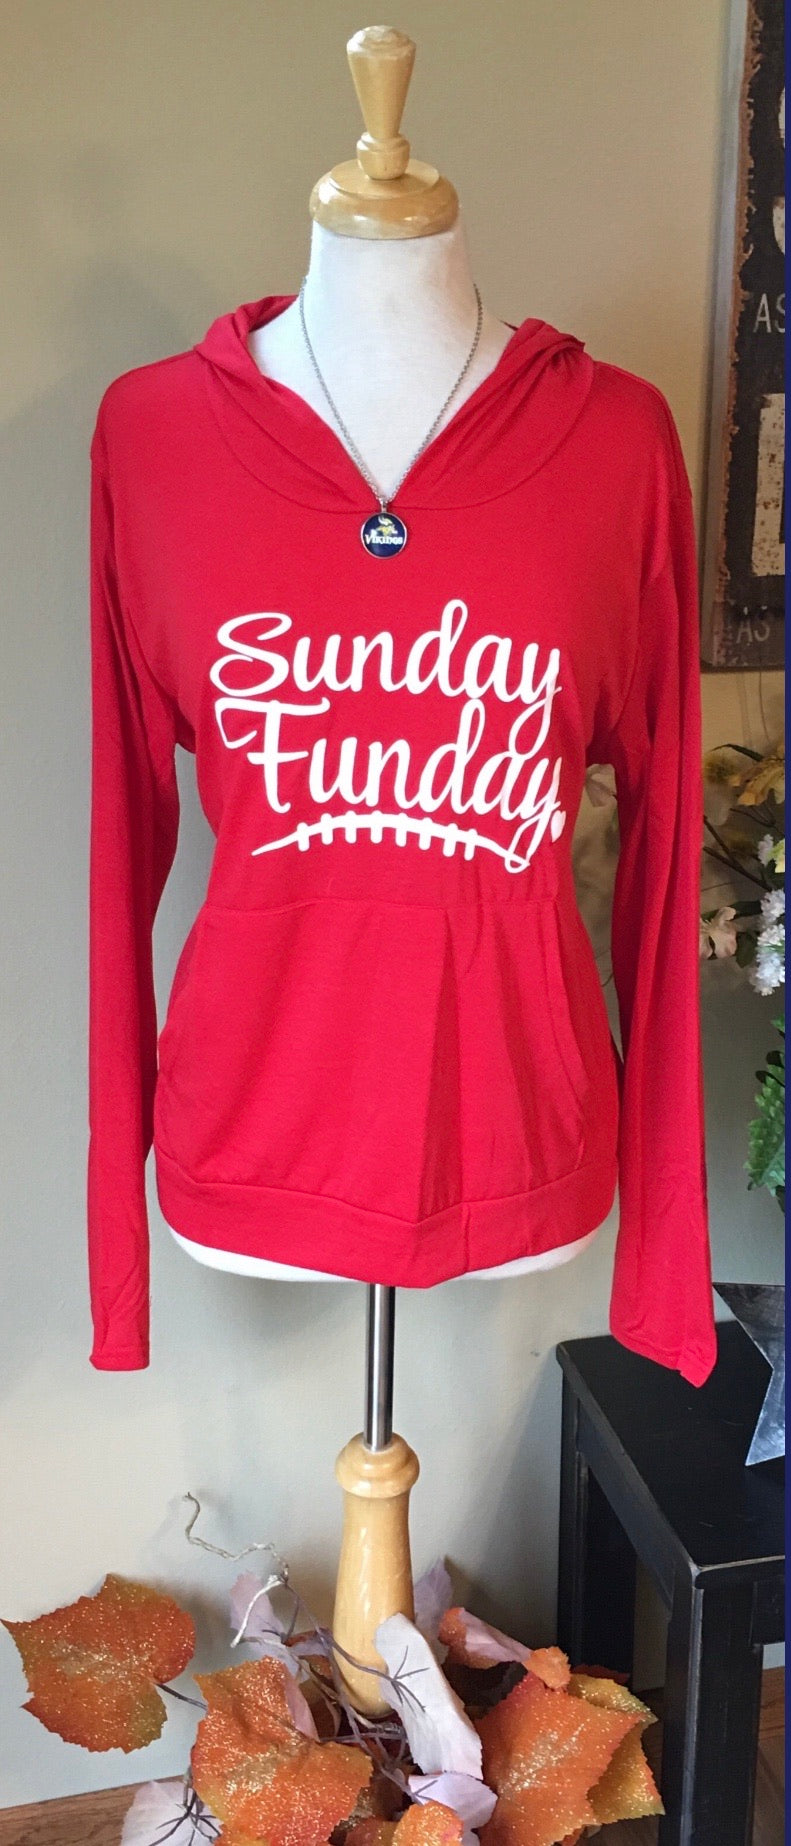 Hoodie with FREE earrings! { Sunday funday } Red or black • Lightweight • Front pocket • Kids and adults • Unisex - Stacy's Pink Martini Boutique